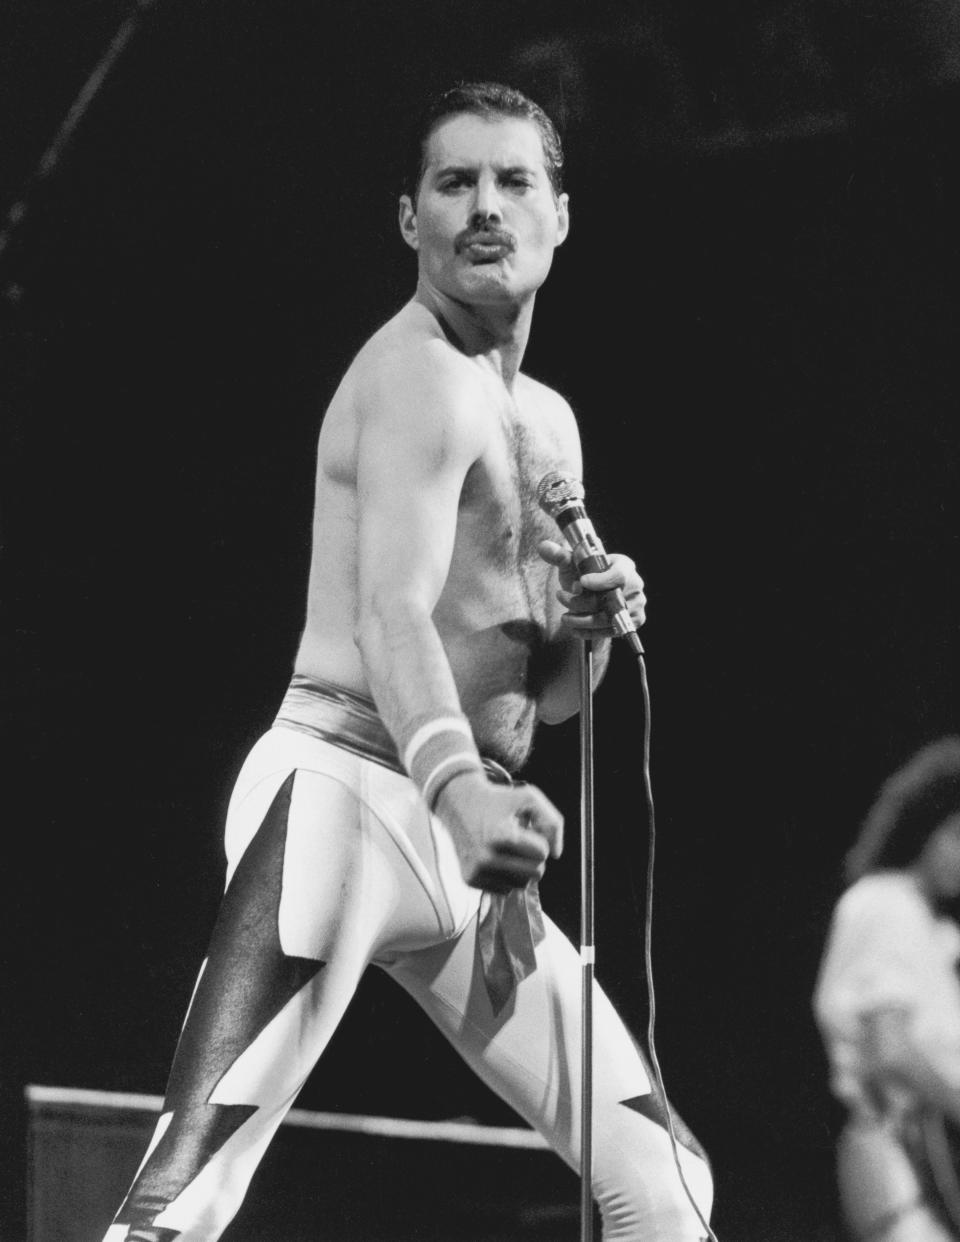 RIO DE JANERIO - 1985: (FILE PHOTO) On September 5, 2011 Freddie Mercury of Queen would have celebrated his 65th birthday while Queen's last five studio albums will be reissued. Please refer to the following profile on Getty Images Archival for further imagery. http://www.gettyimages.co.uk/Search/Search.aspx?EventId=120781881&EditorialProduct=Archival Singer Freddie Mercury performing with his group Queen at the inaugural Rock In Rio festival in Rio de Janerio, 24th January 1985. (Photo by Dave Hogan/Getty Images)